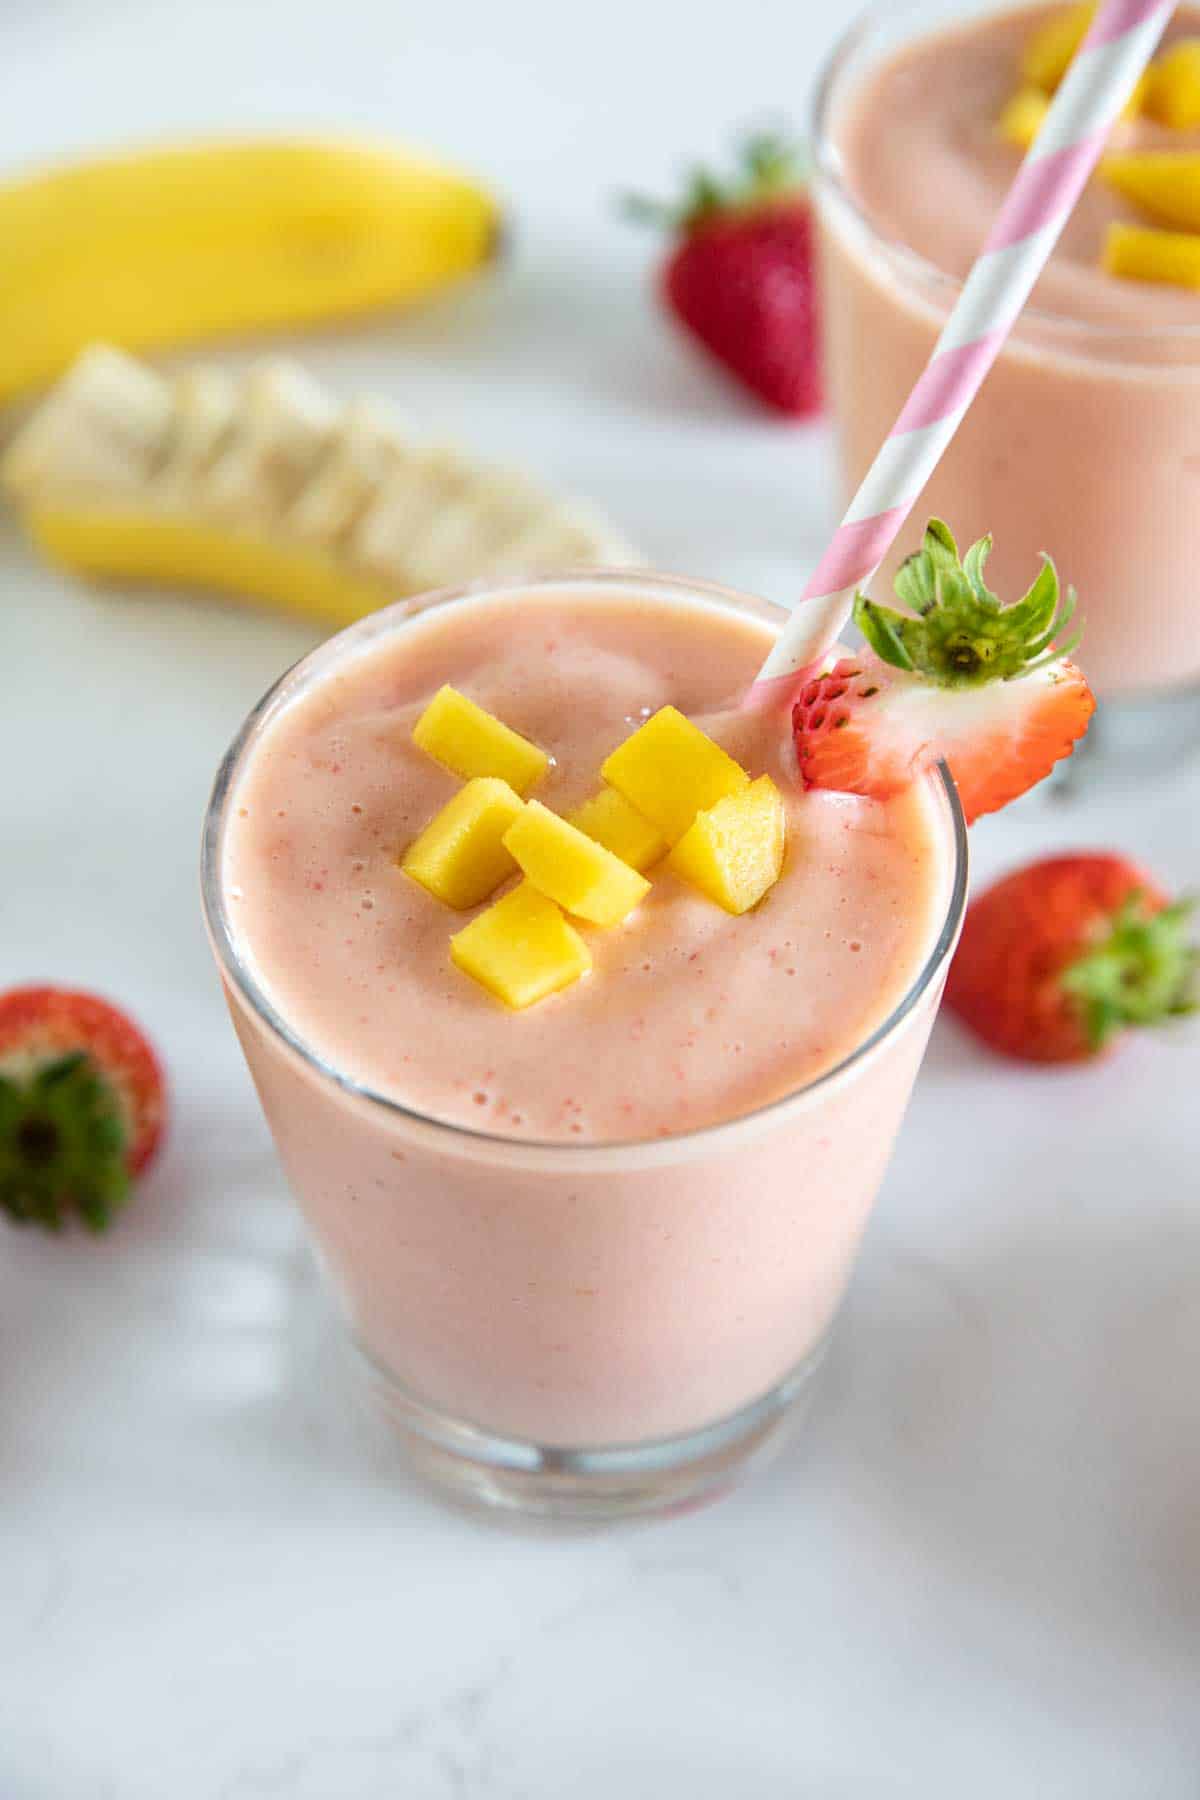 Coconut Milk Smoothie - The Endless Meal®